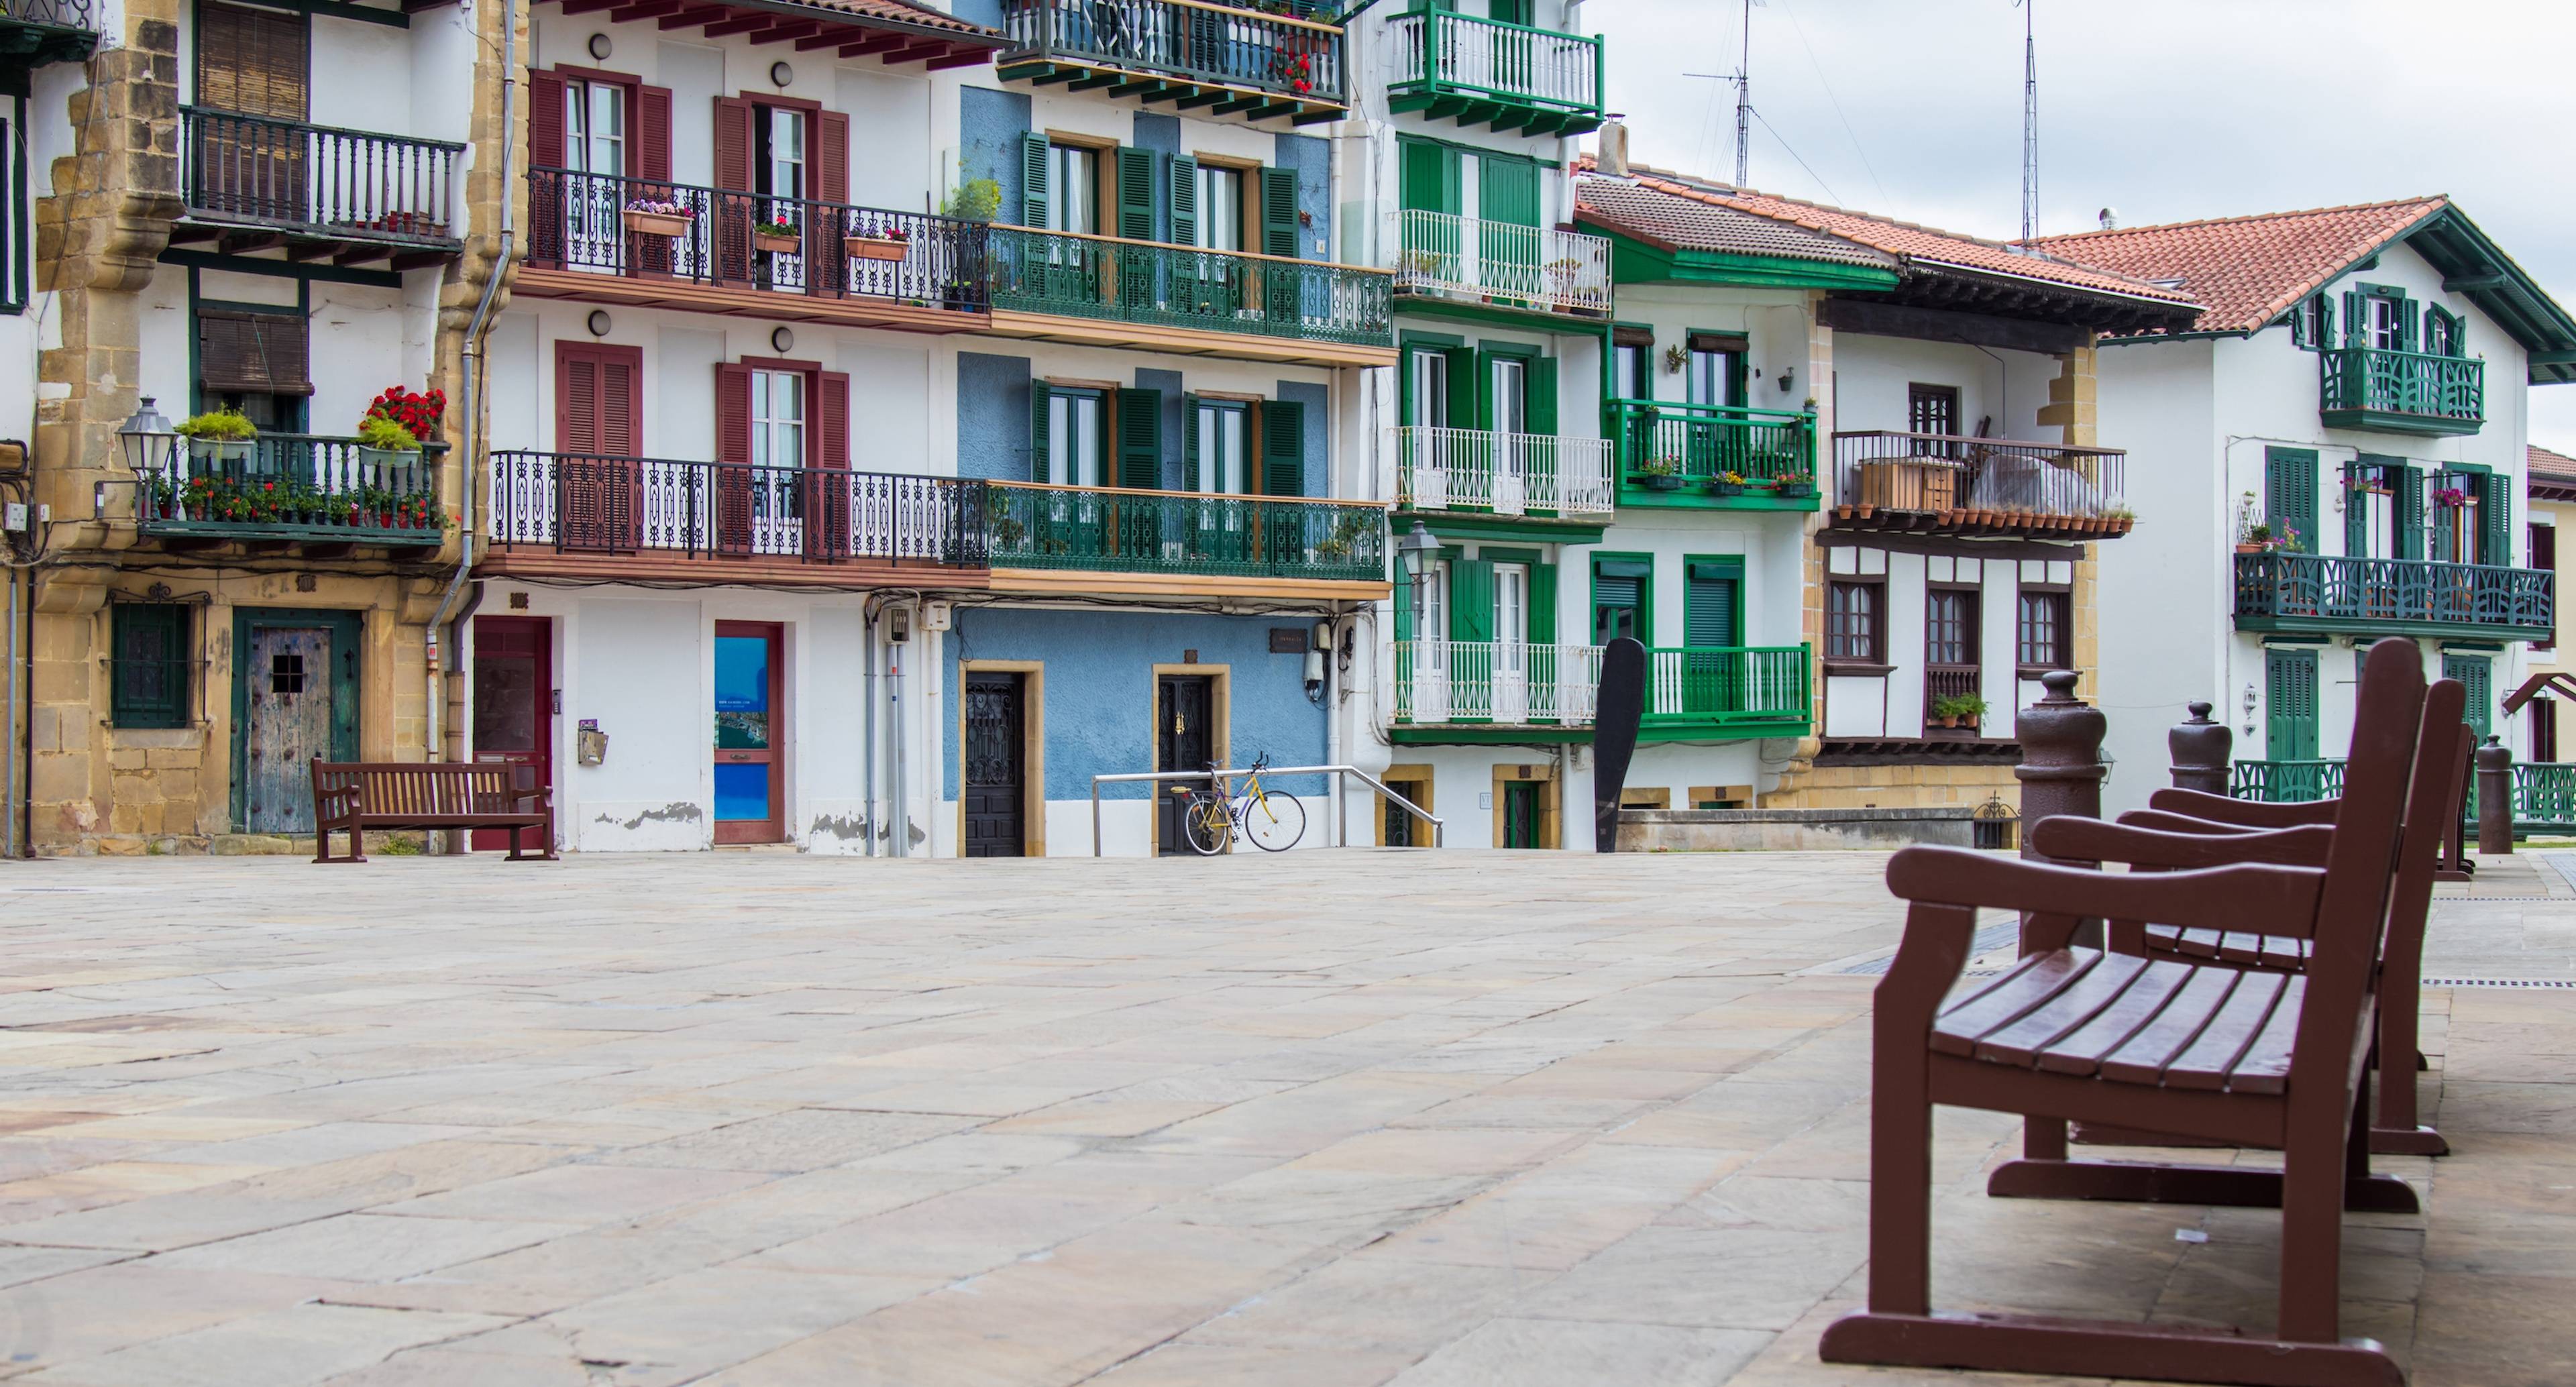 Charming Villages in the Basque Country